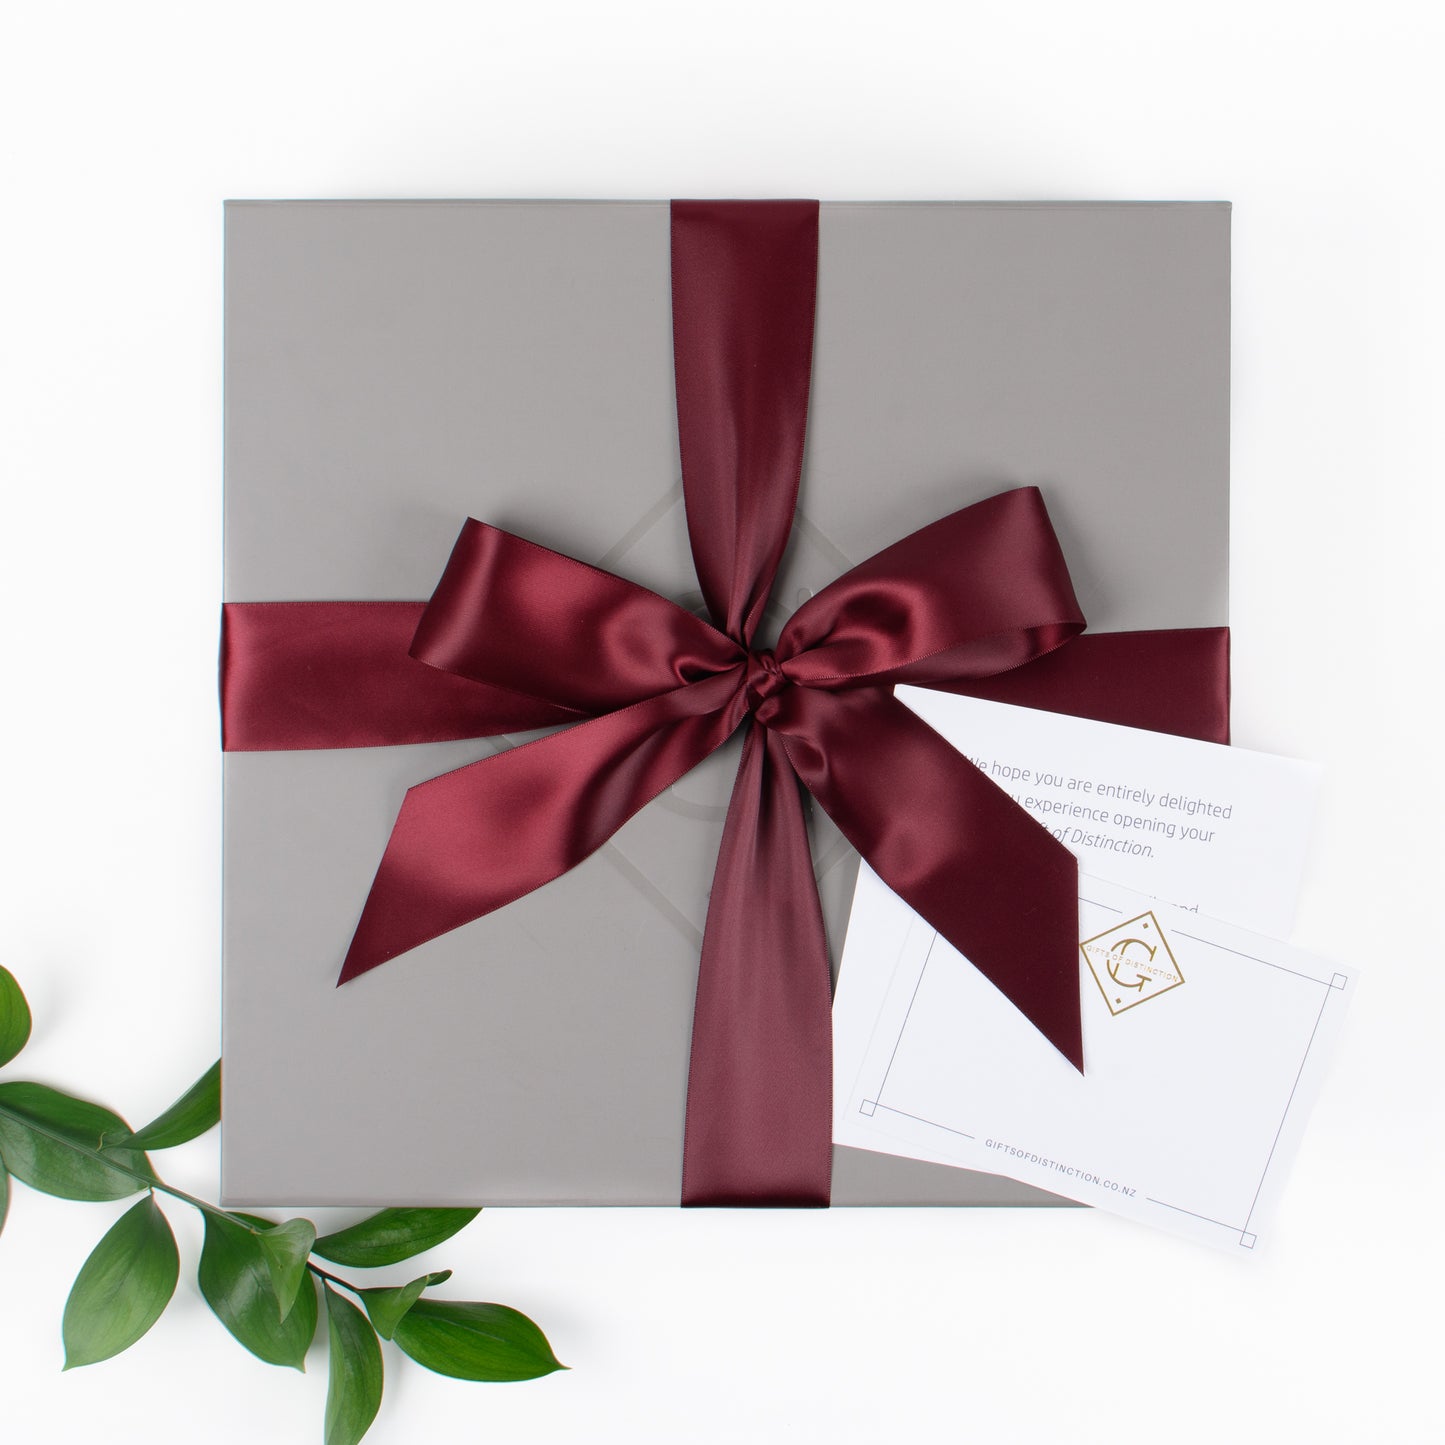 In Appreciation - Gift Boxes NZ - Gifts of Distinction